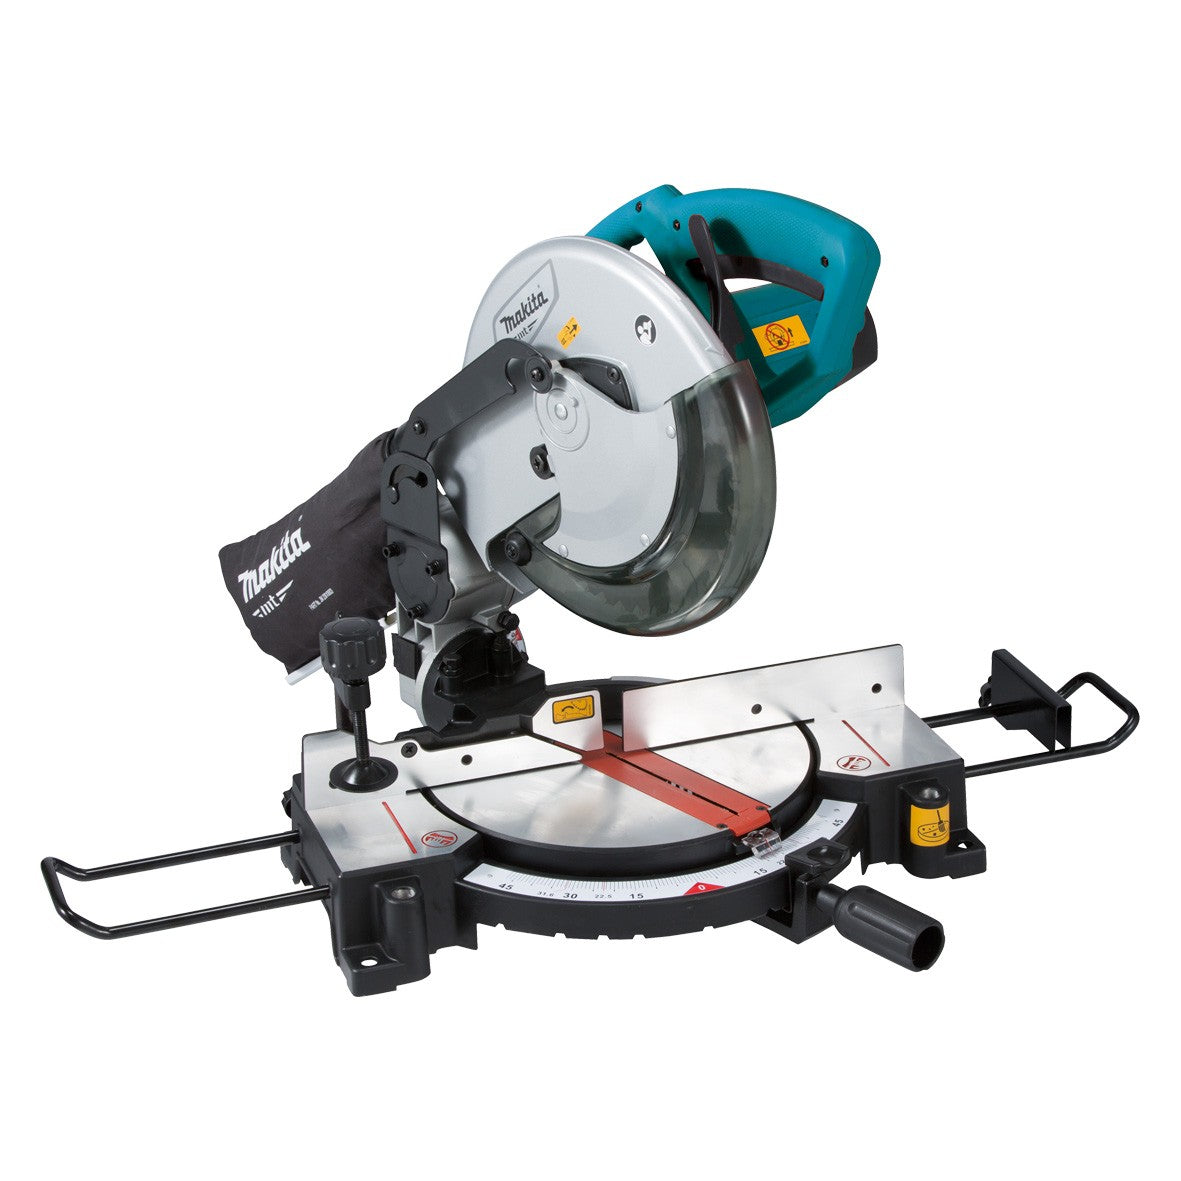 MT Series 255mm (10") Compound Mitre Saw M2300B by Makita